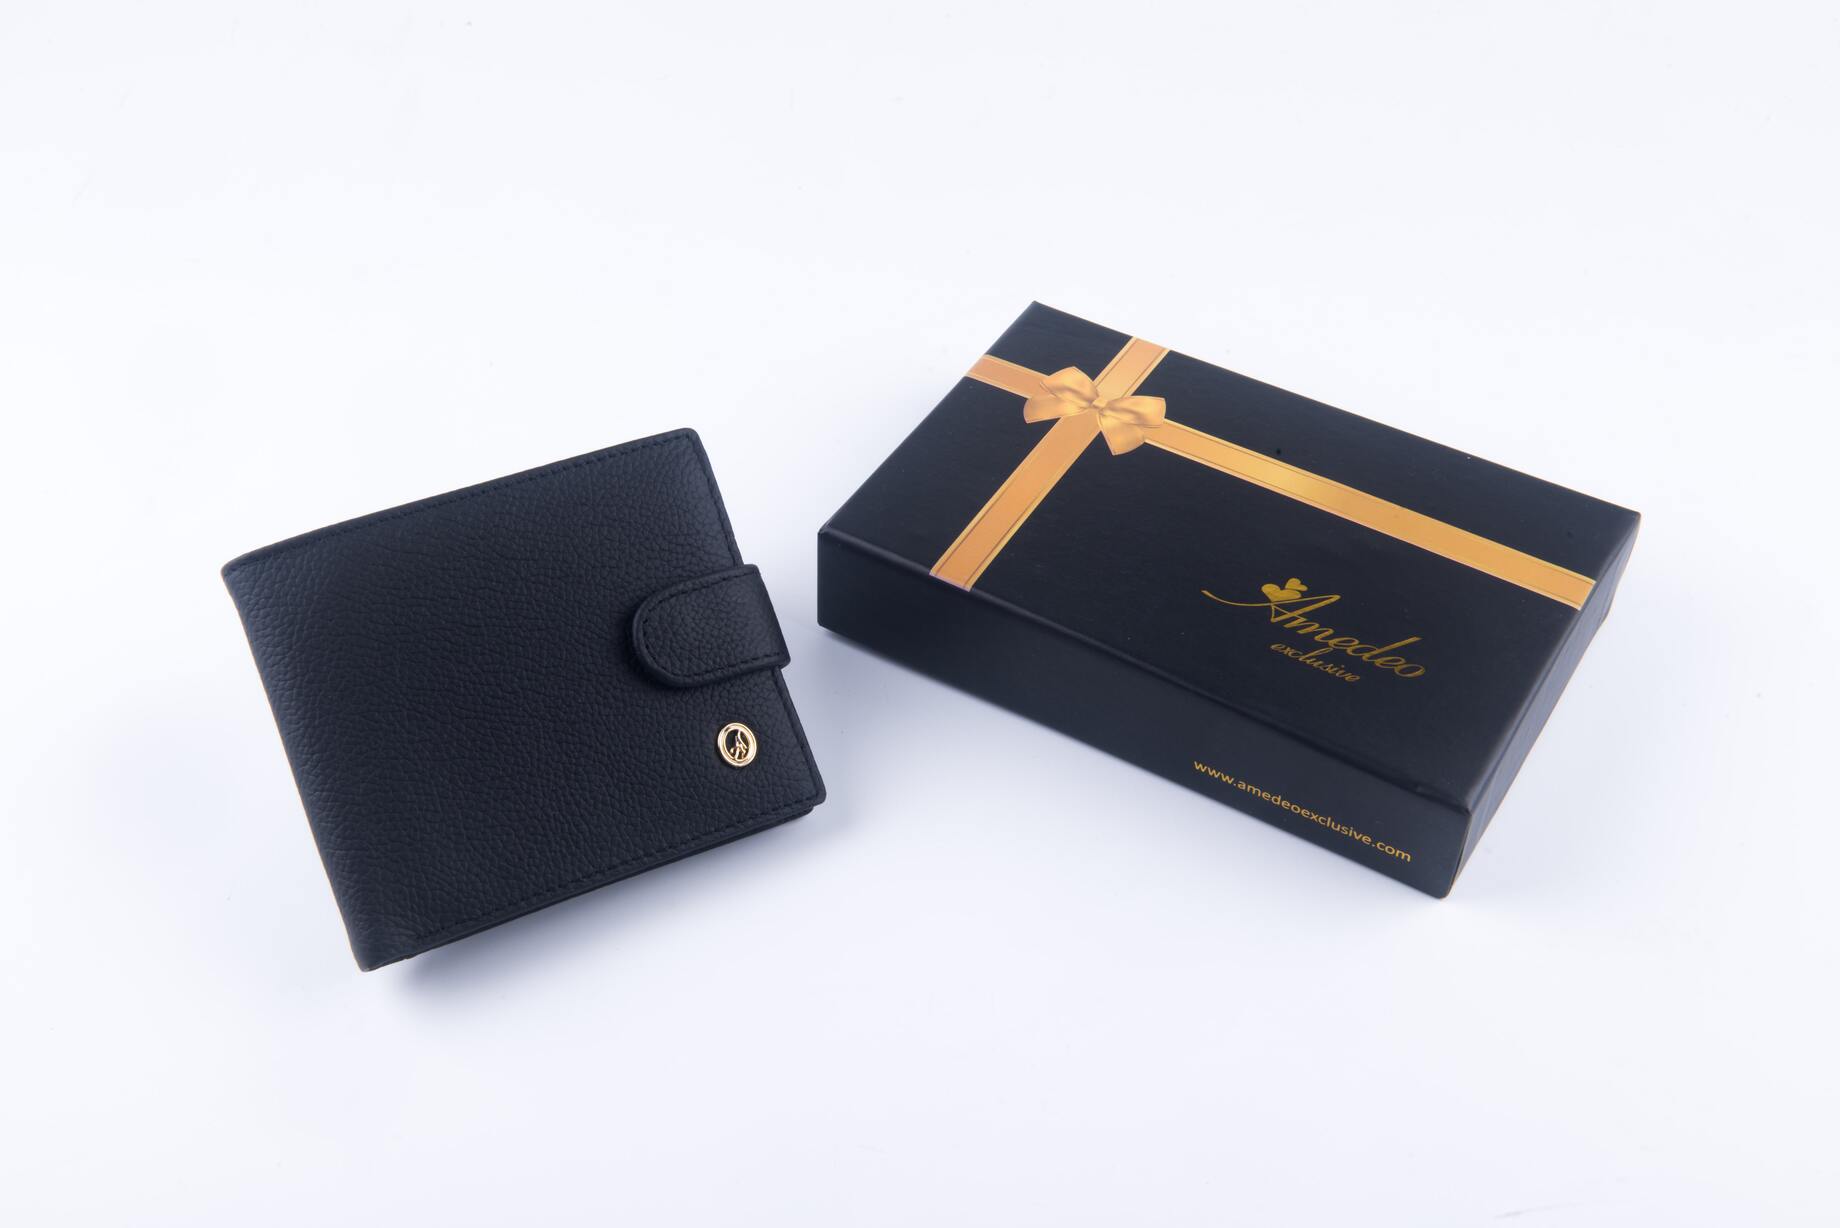 Leather Wallets Black -AMLW-0001 - Amedeo Exclusive